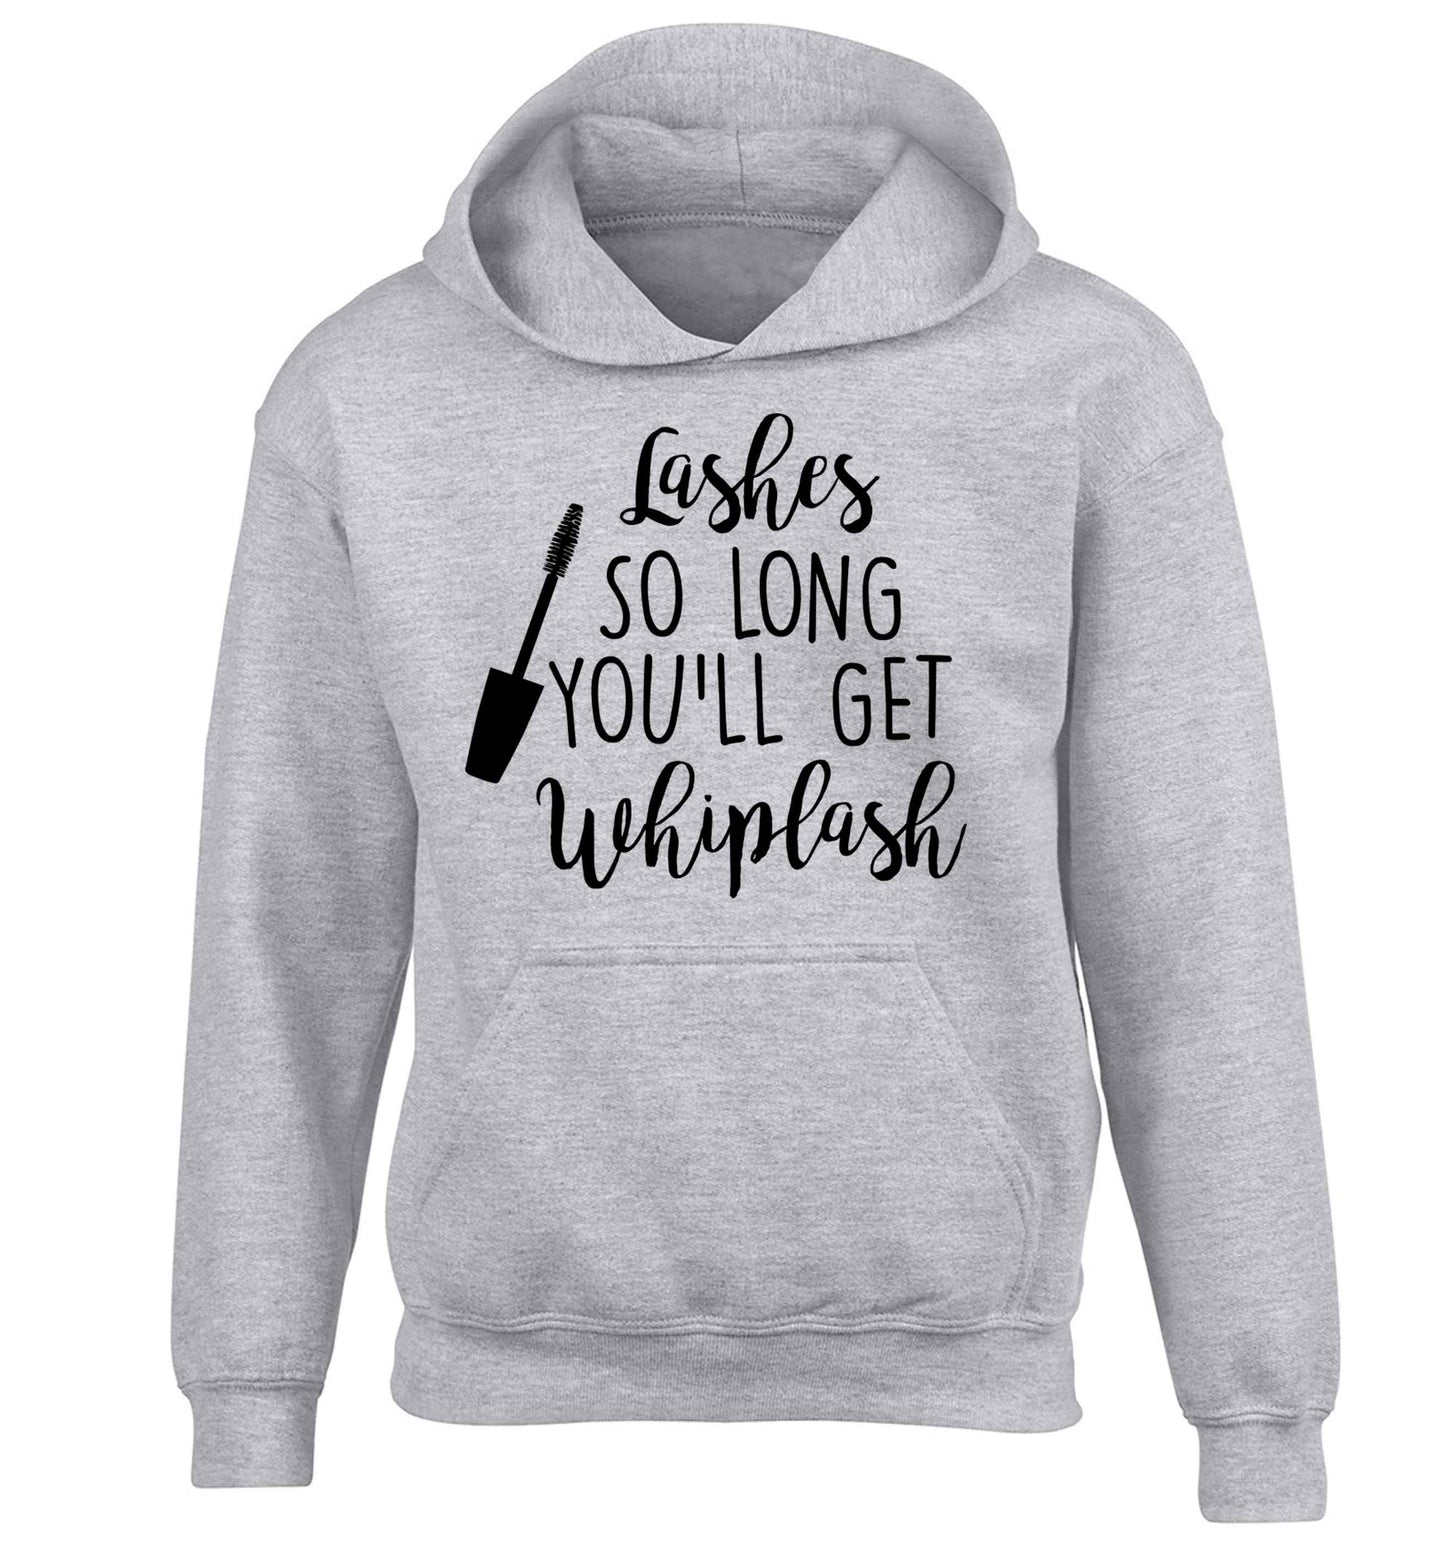 Lashes so long you'll get whiplash children's grey hoodie 12-13 Years